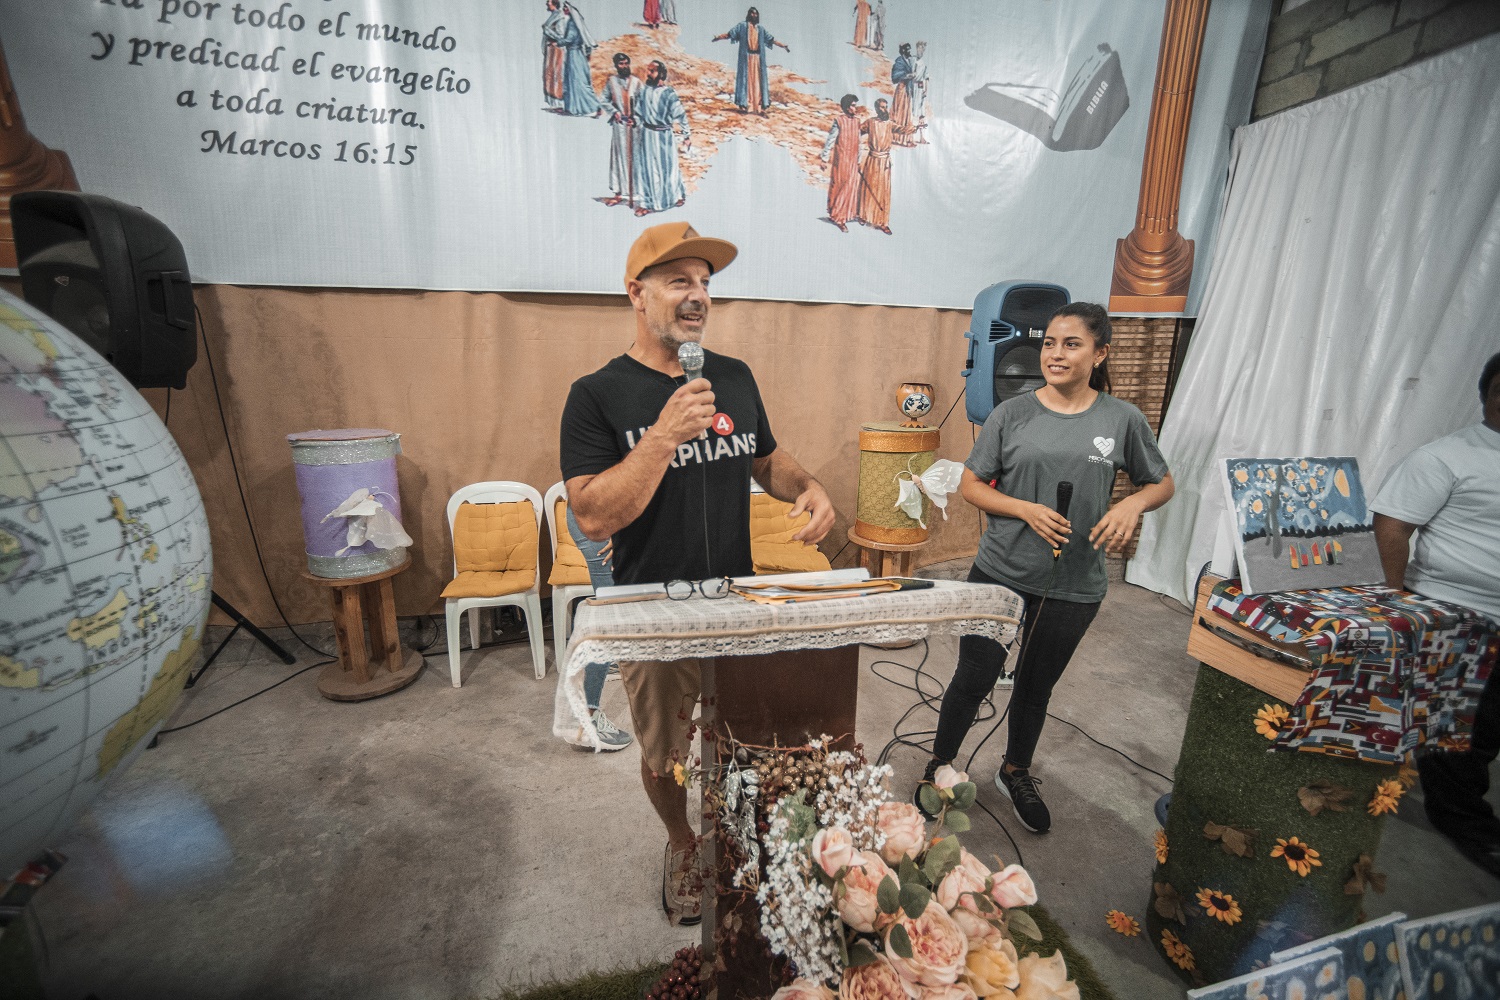 A man and a woman stand in front of a podium with microphones in their hands at the Ecuador charity event. They are both smiling, proud of their work with the non-profit organization U4O.